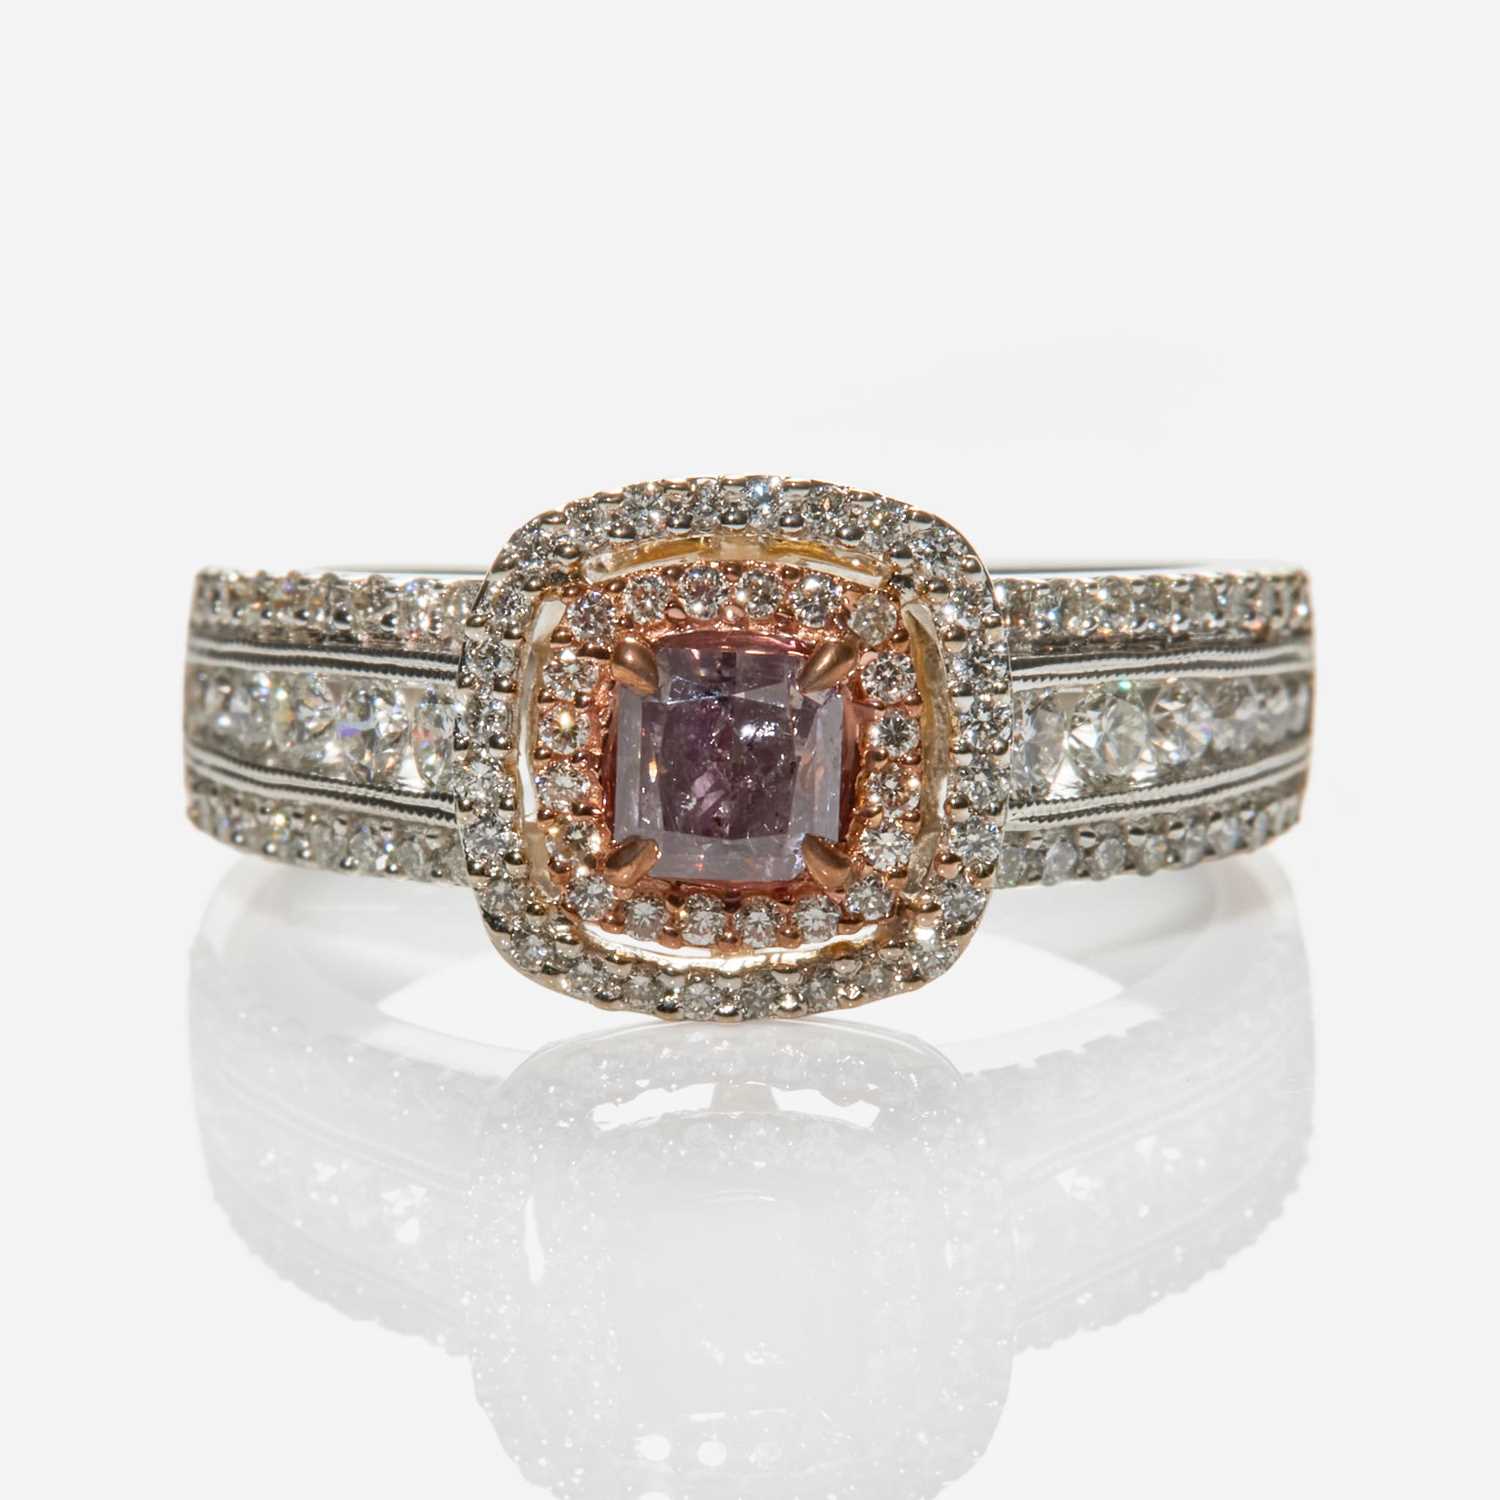 Lot 42 - A White Gold, Diamond, and Colored Diamond Ring